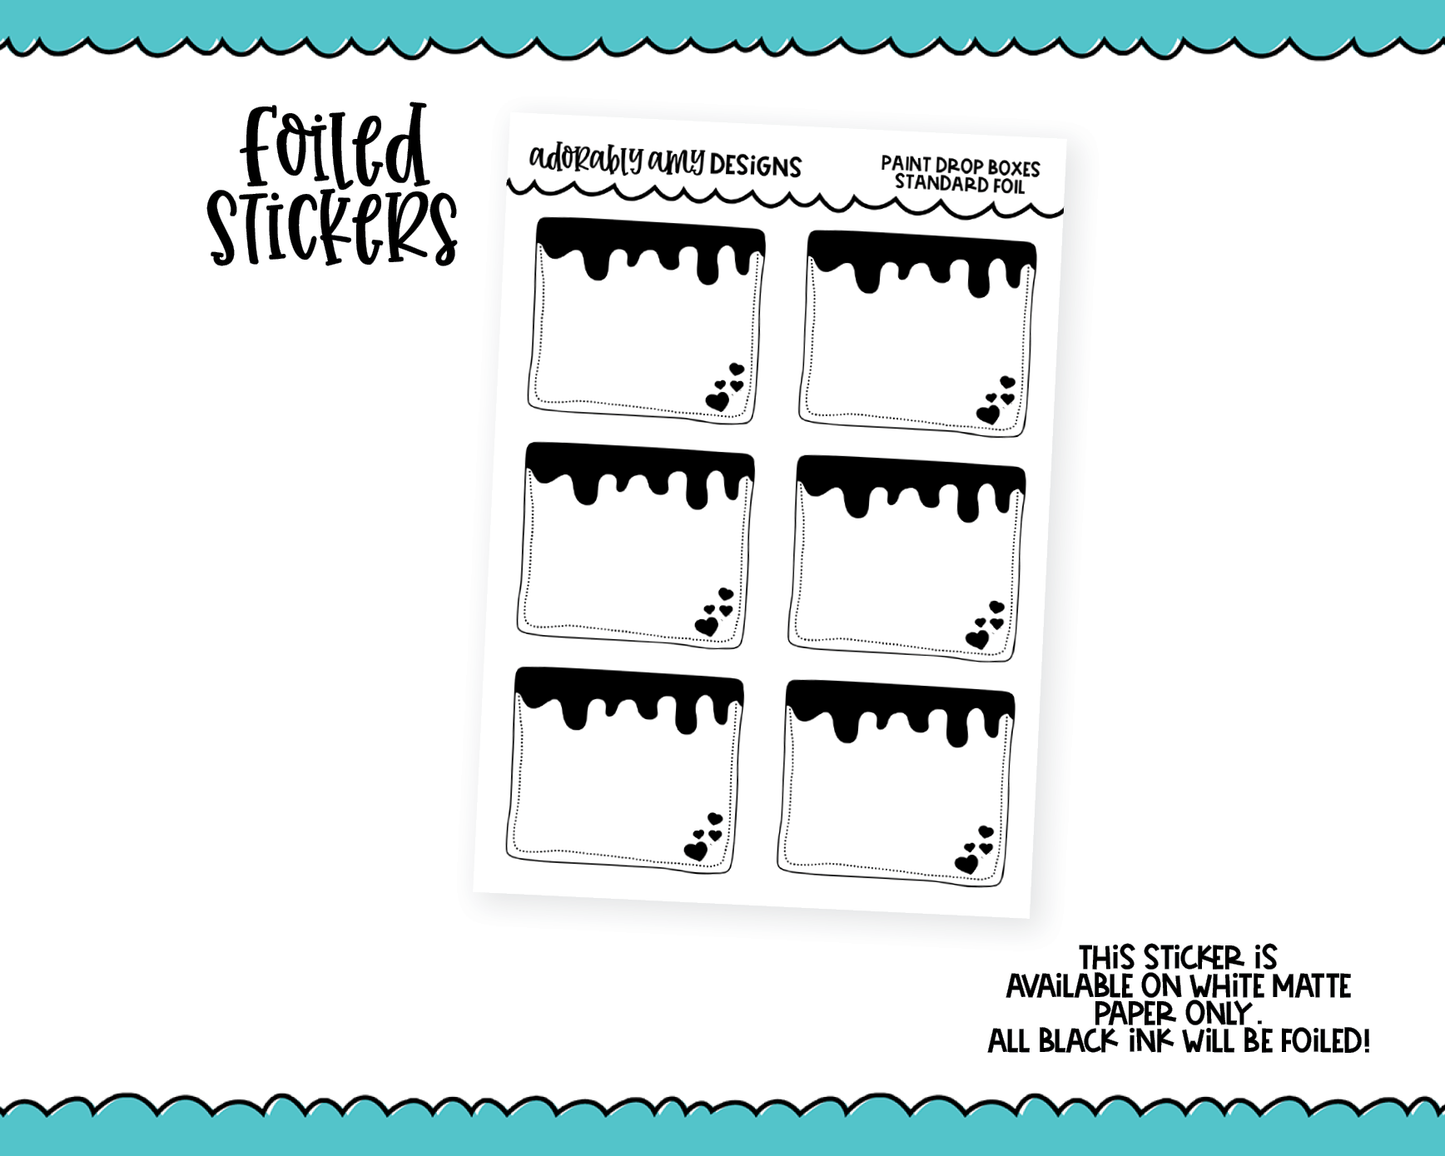 Foiled Paint Drop Boxes Standard Size Functional Decorative Planner Stickers for any Planner or Insert